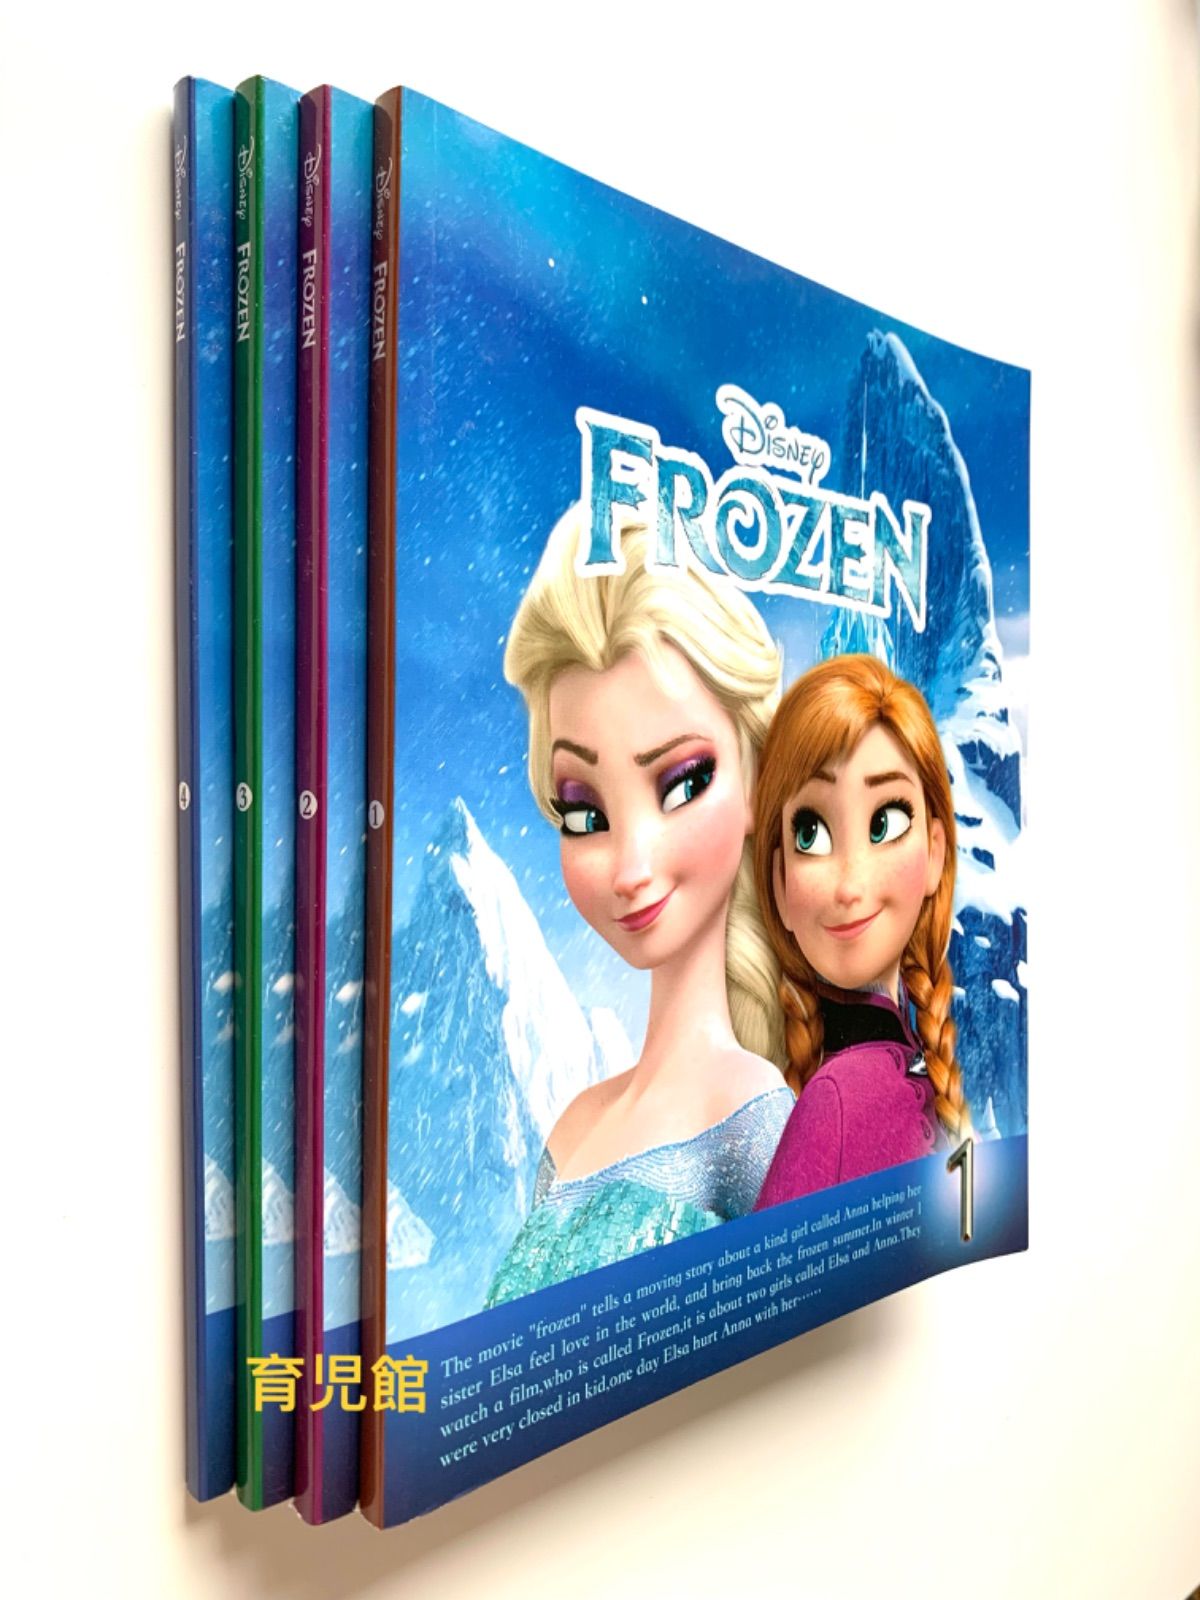 Frozen絵本4冊　アナと雪の女王　音源付動画付き　マイヤペン対応